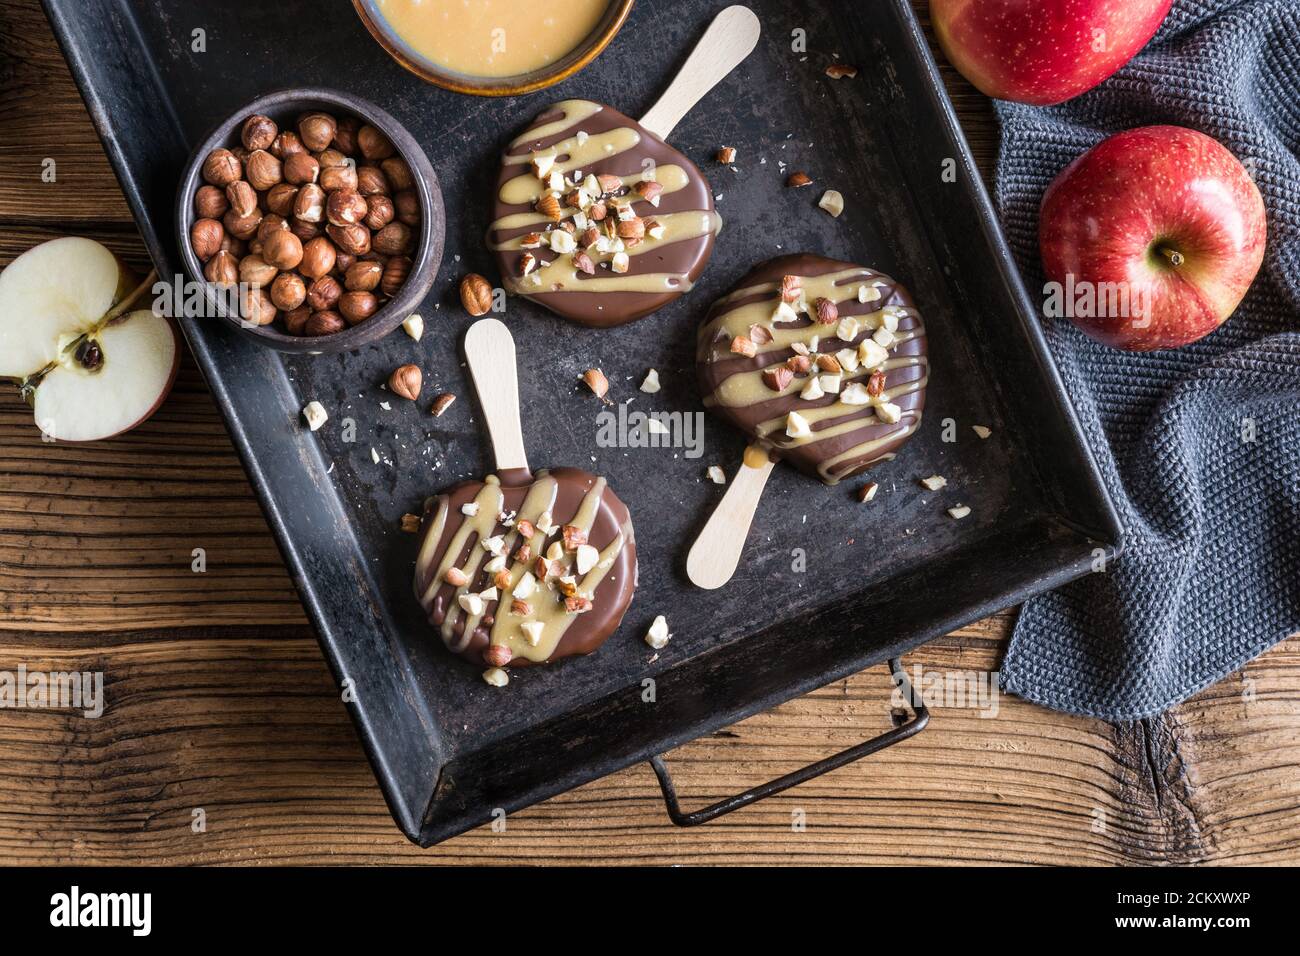 Apple popsicle dipped in chocolate and caramel, studded with chopped hazelnuts Stock Photo